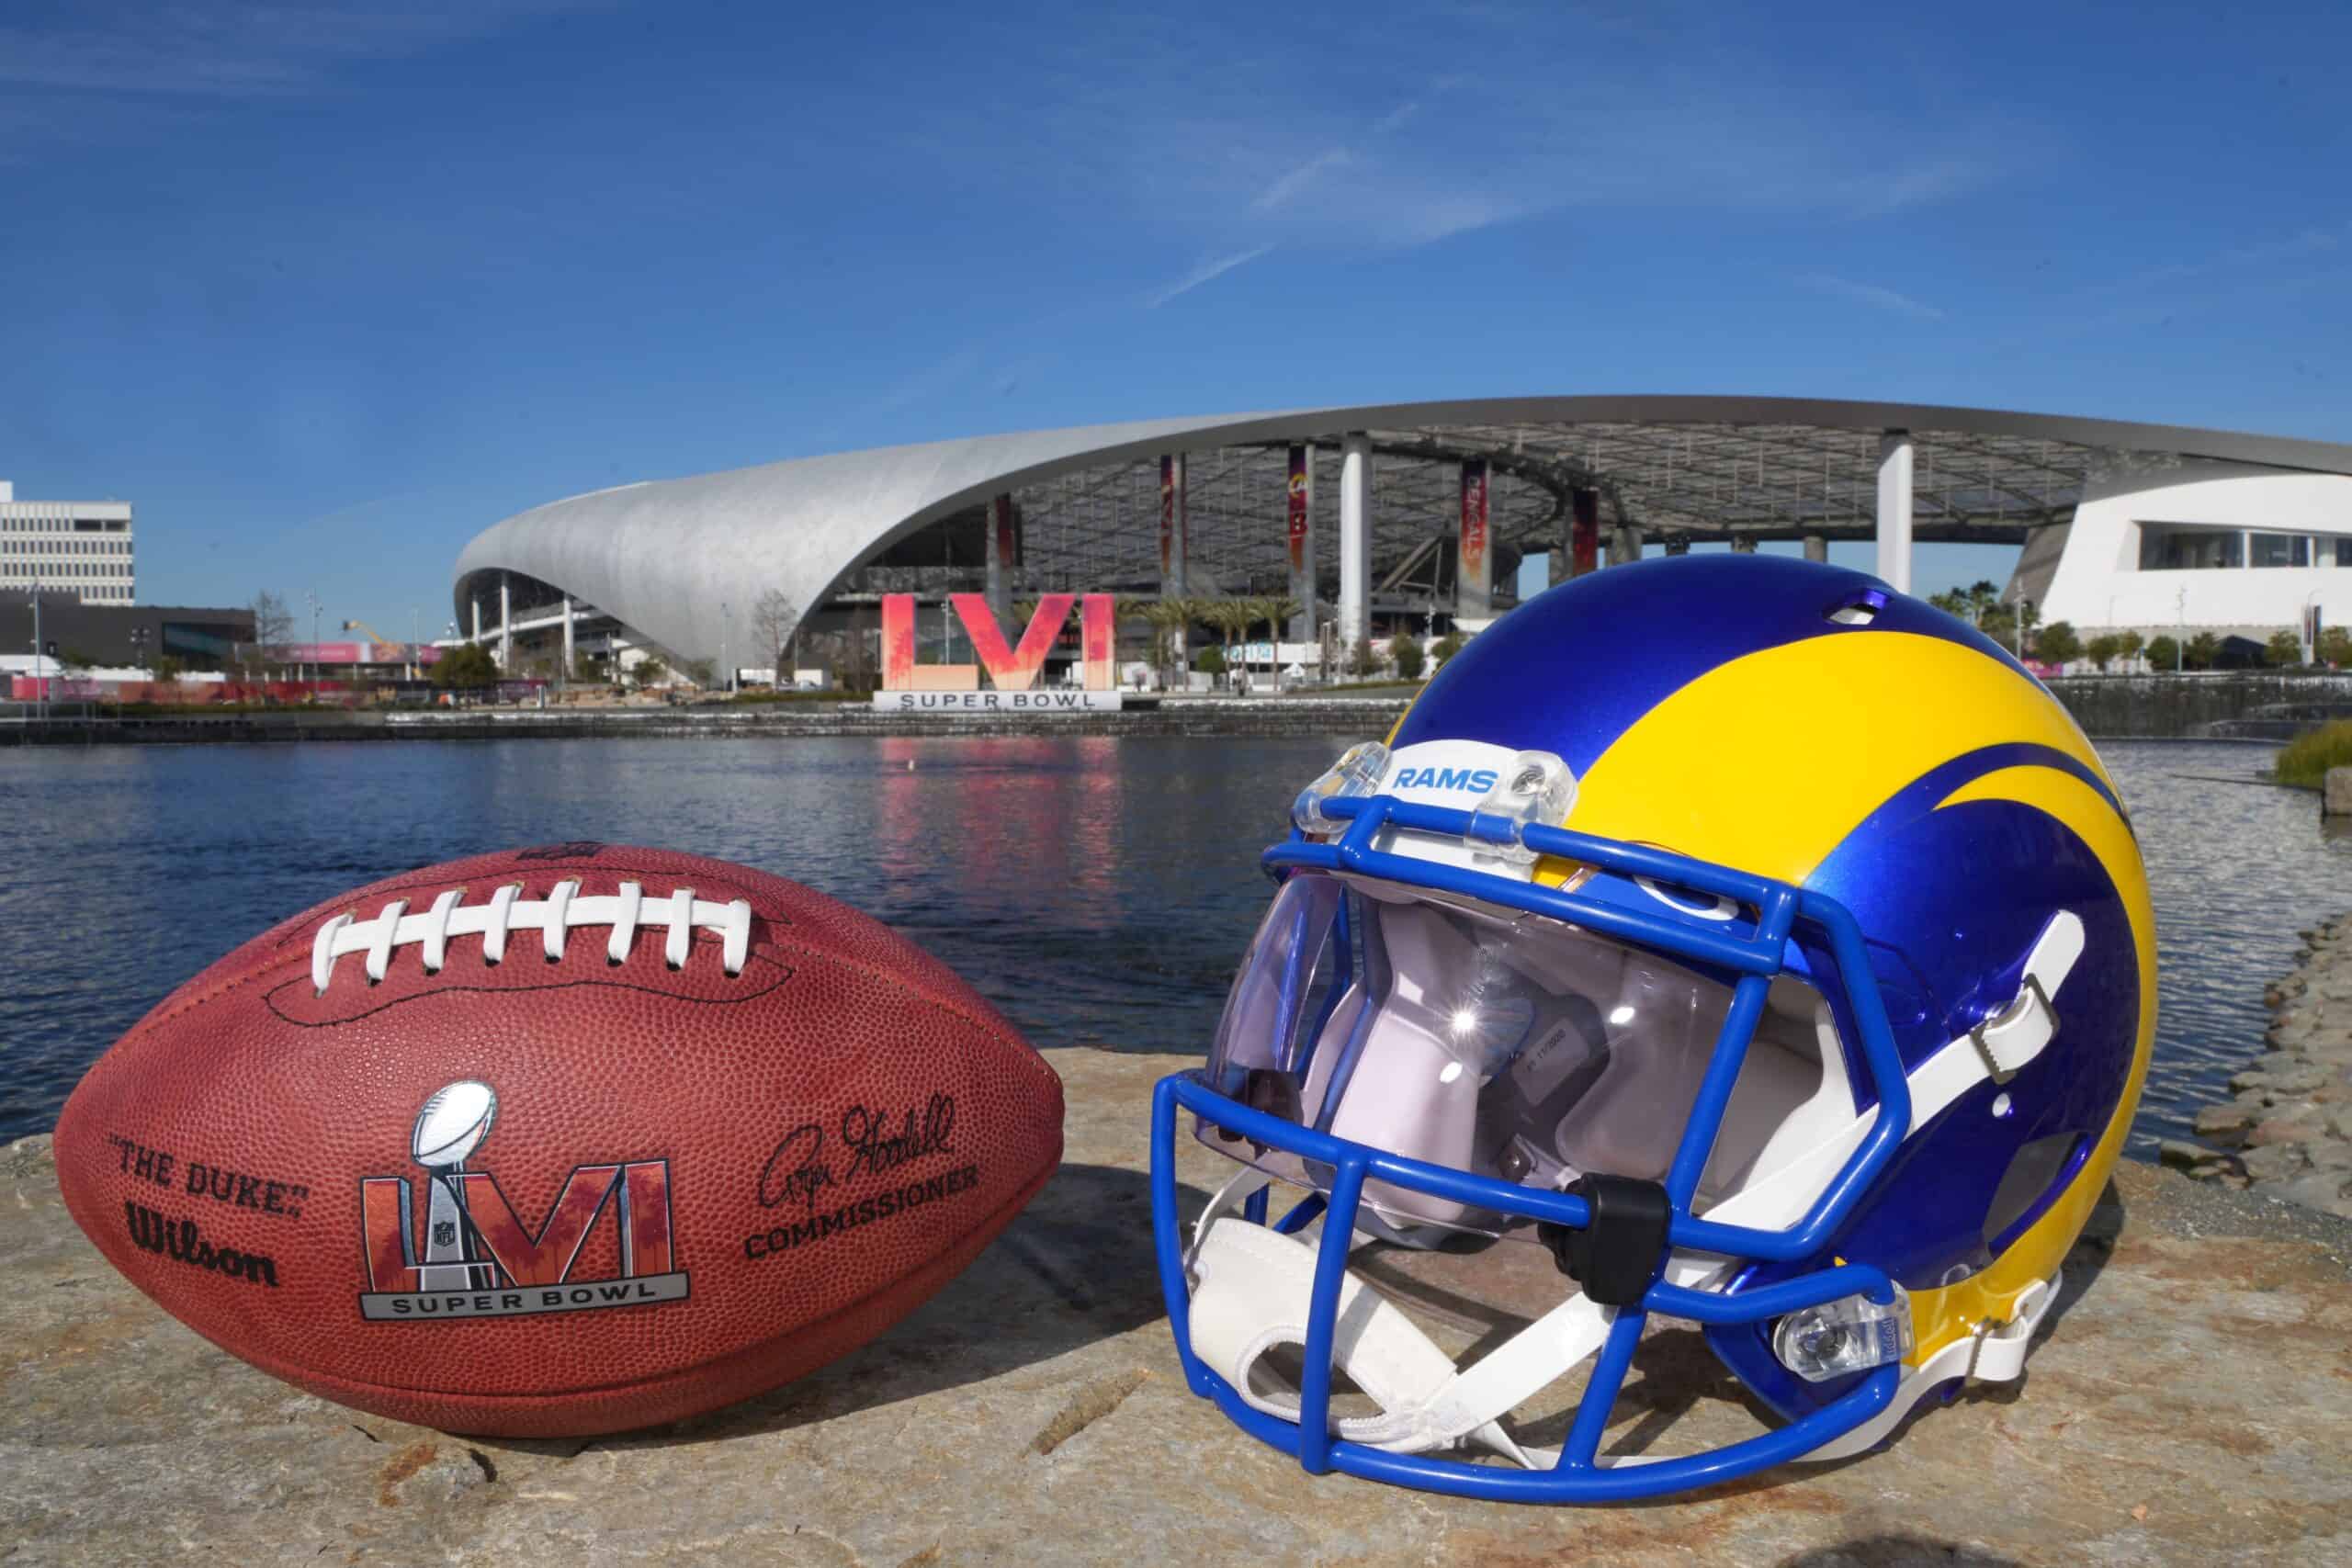 Los Angeles Rams Super Bowl History: Appearances, wins, record, and more